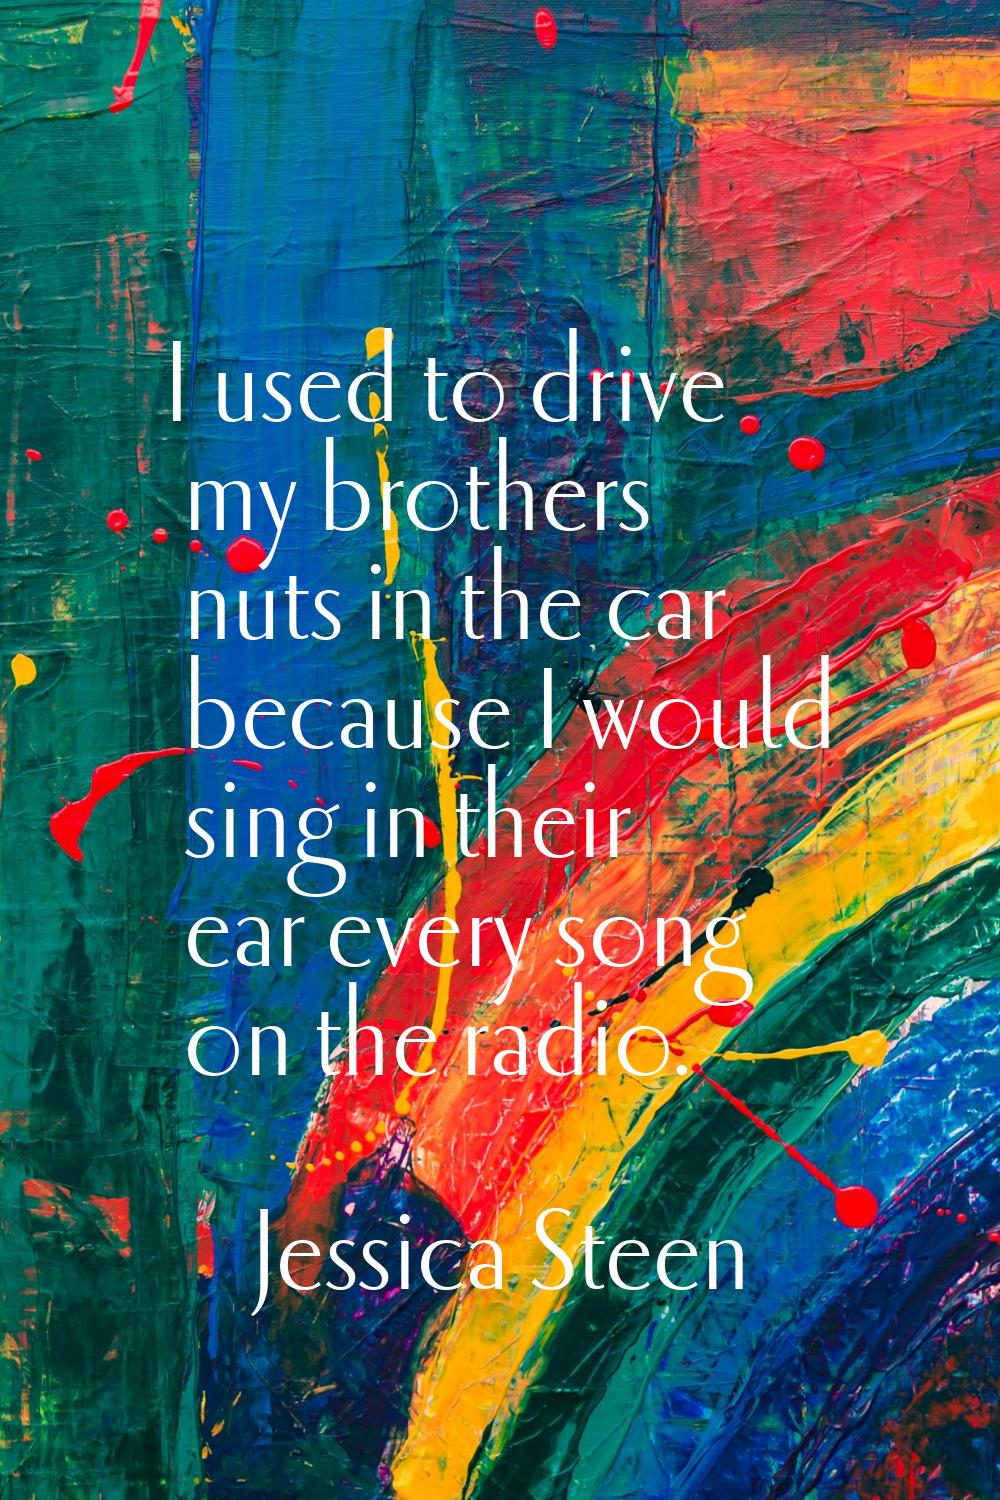 I used to drive my brothers nuts in the car because I would sing in their ear every song on the rad